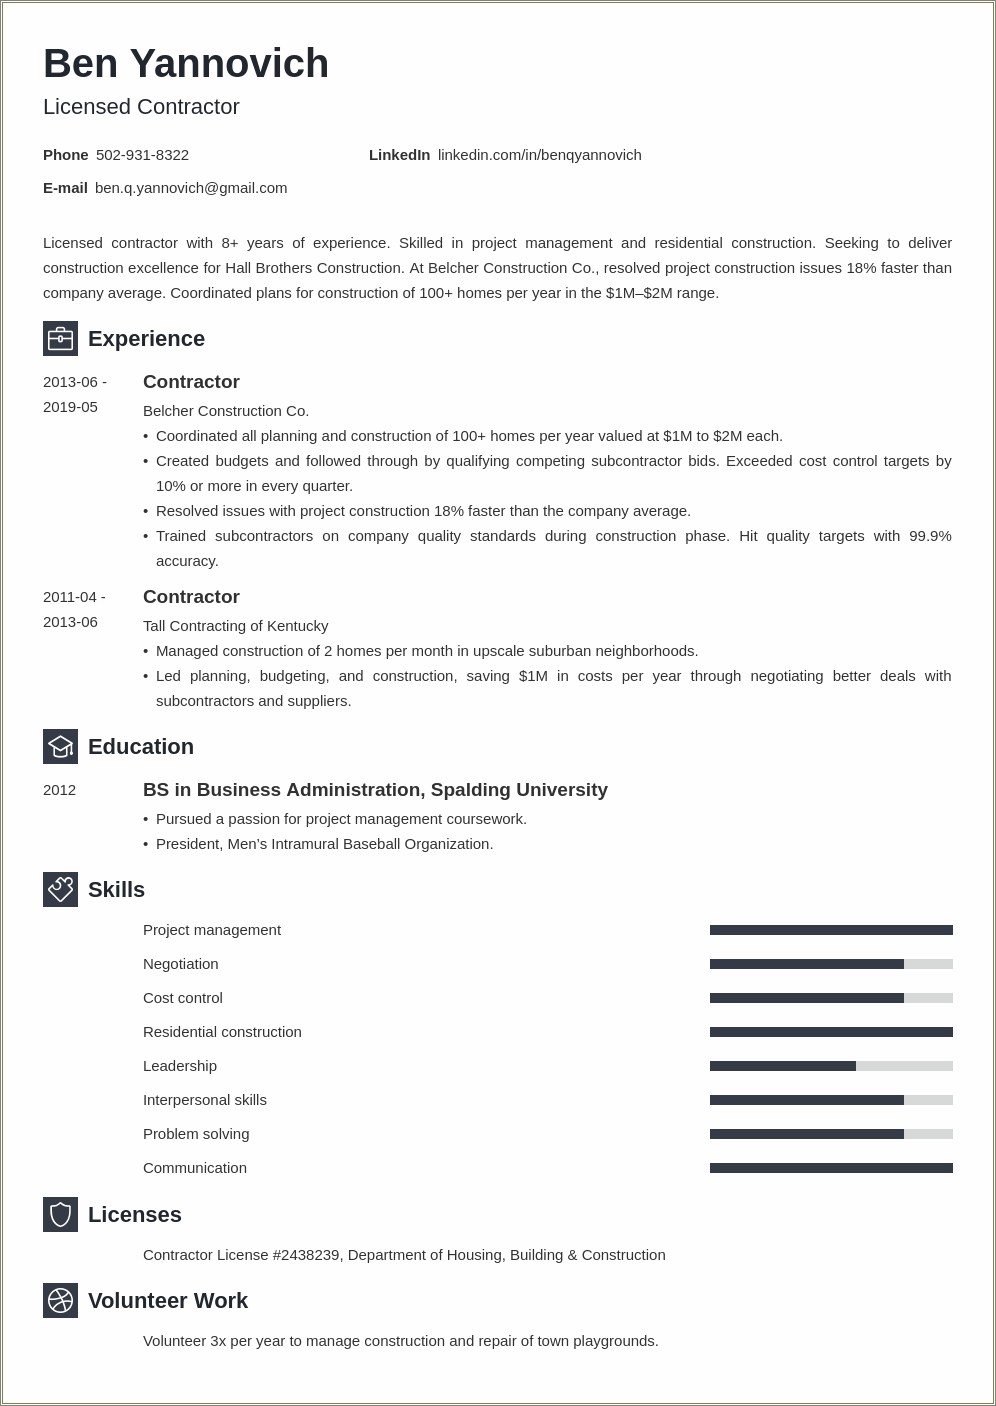 1099 Contractor Cleaning Job Description For Resume